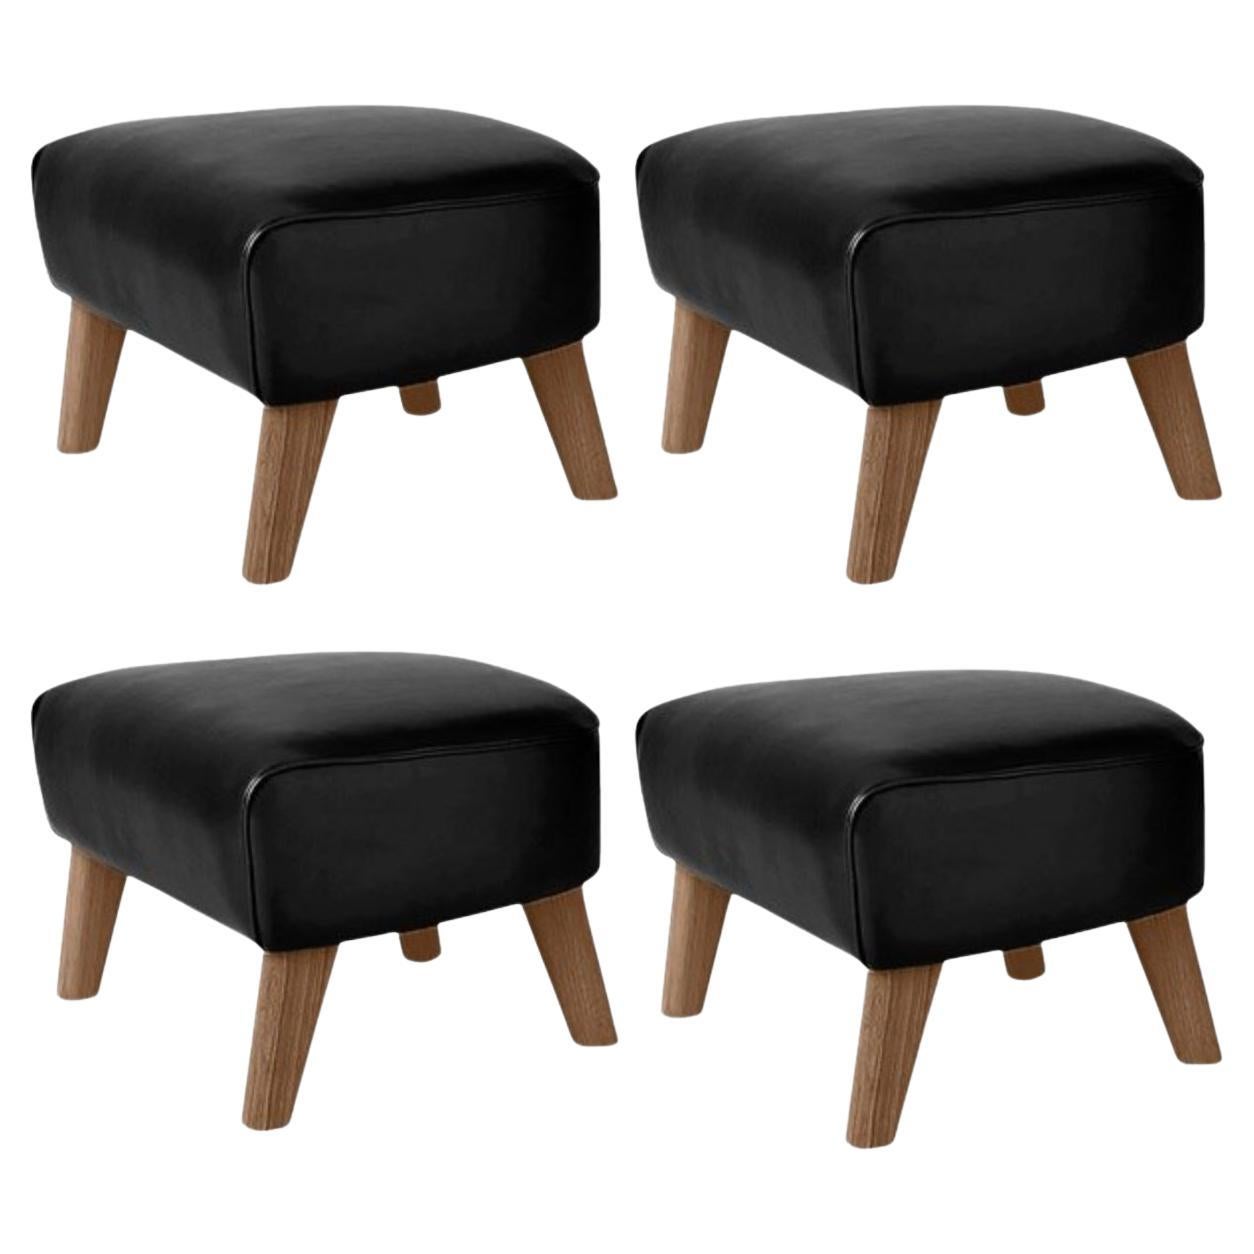 Set of 4 Black Leather and Smoked Oak My Own Chair Footstools by Lassen For Sale